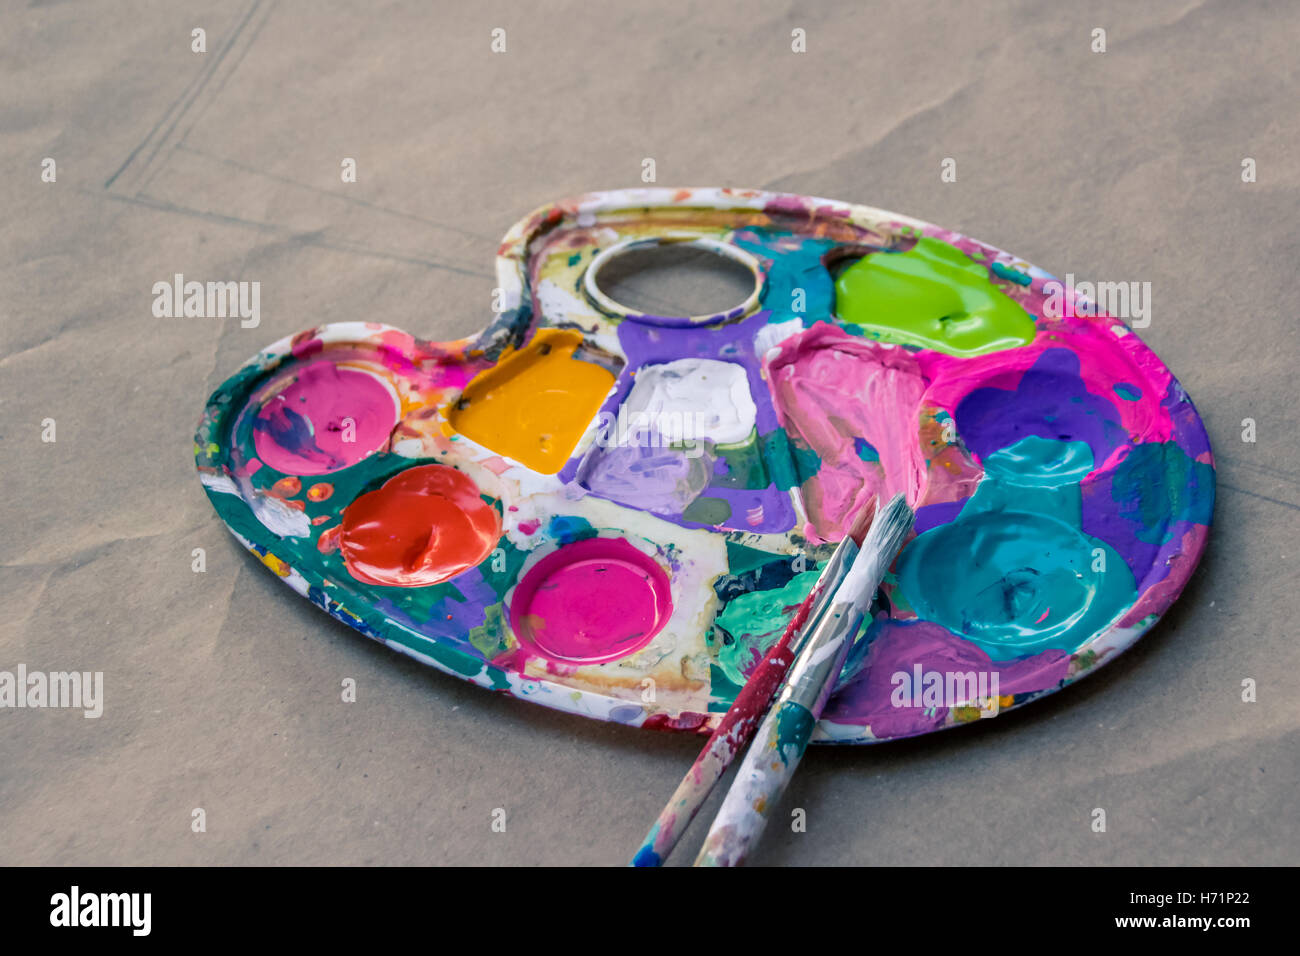 Photograph of an art palette with paint and brushes Stock Photo